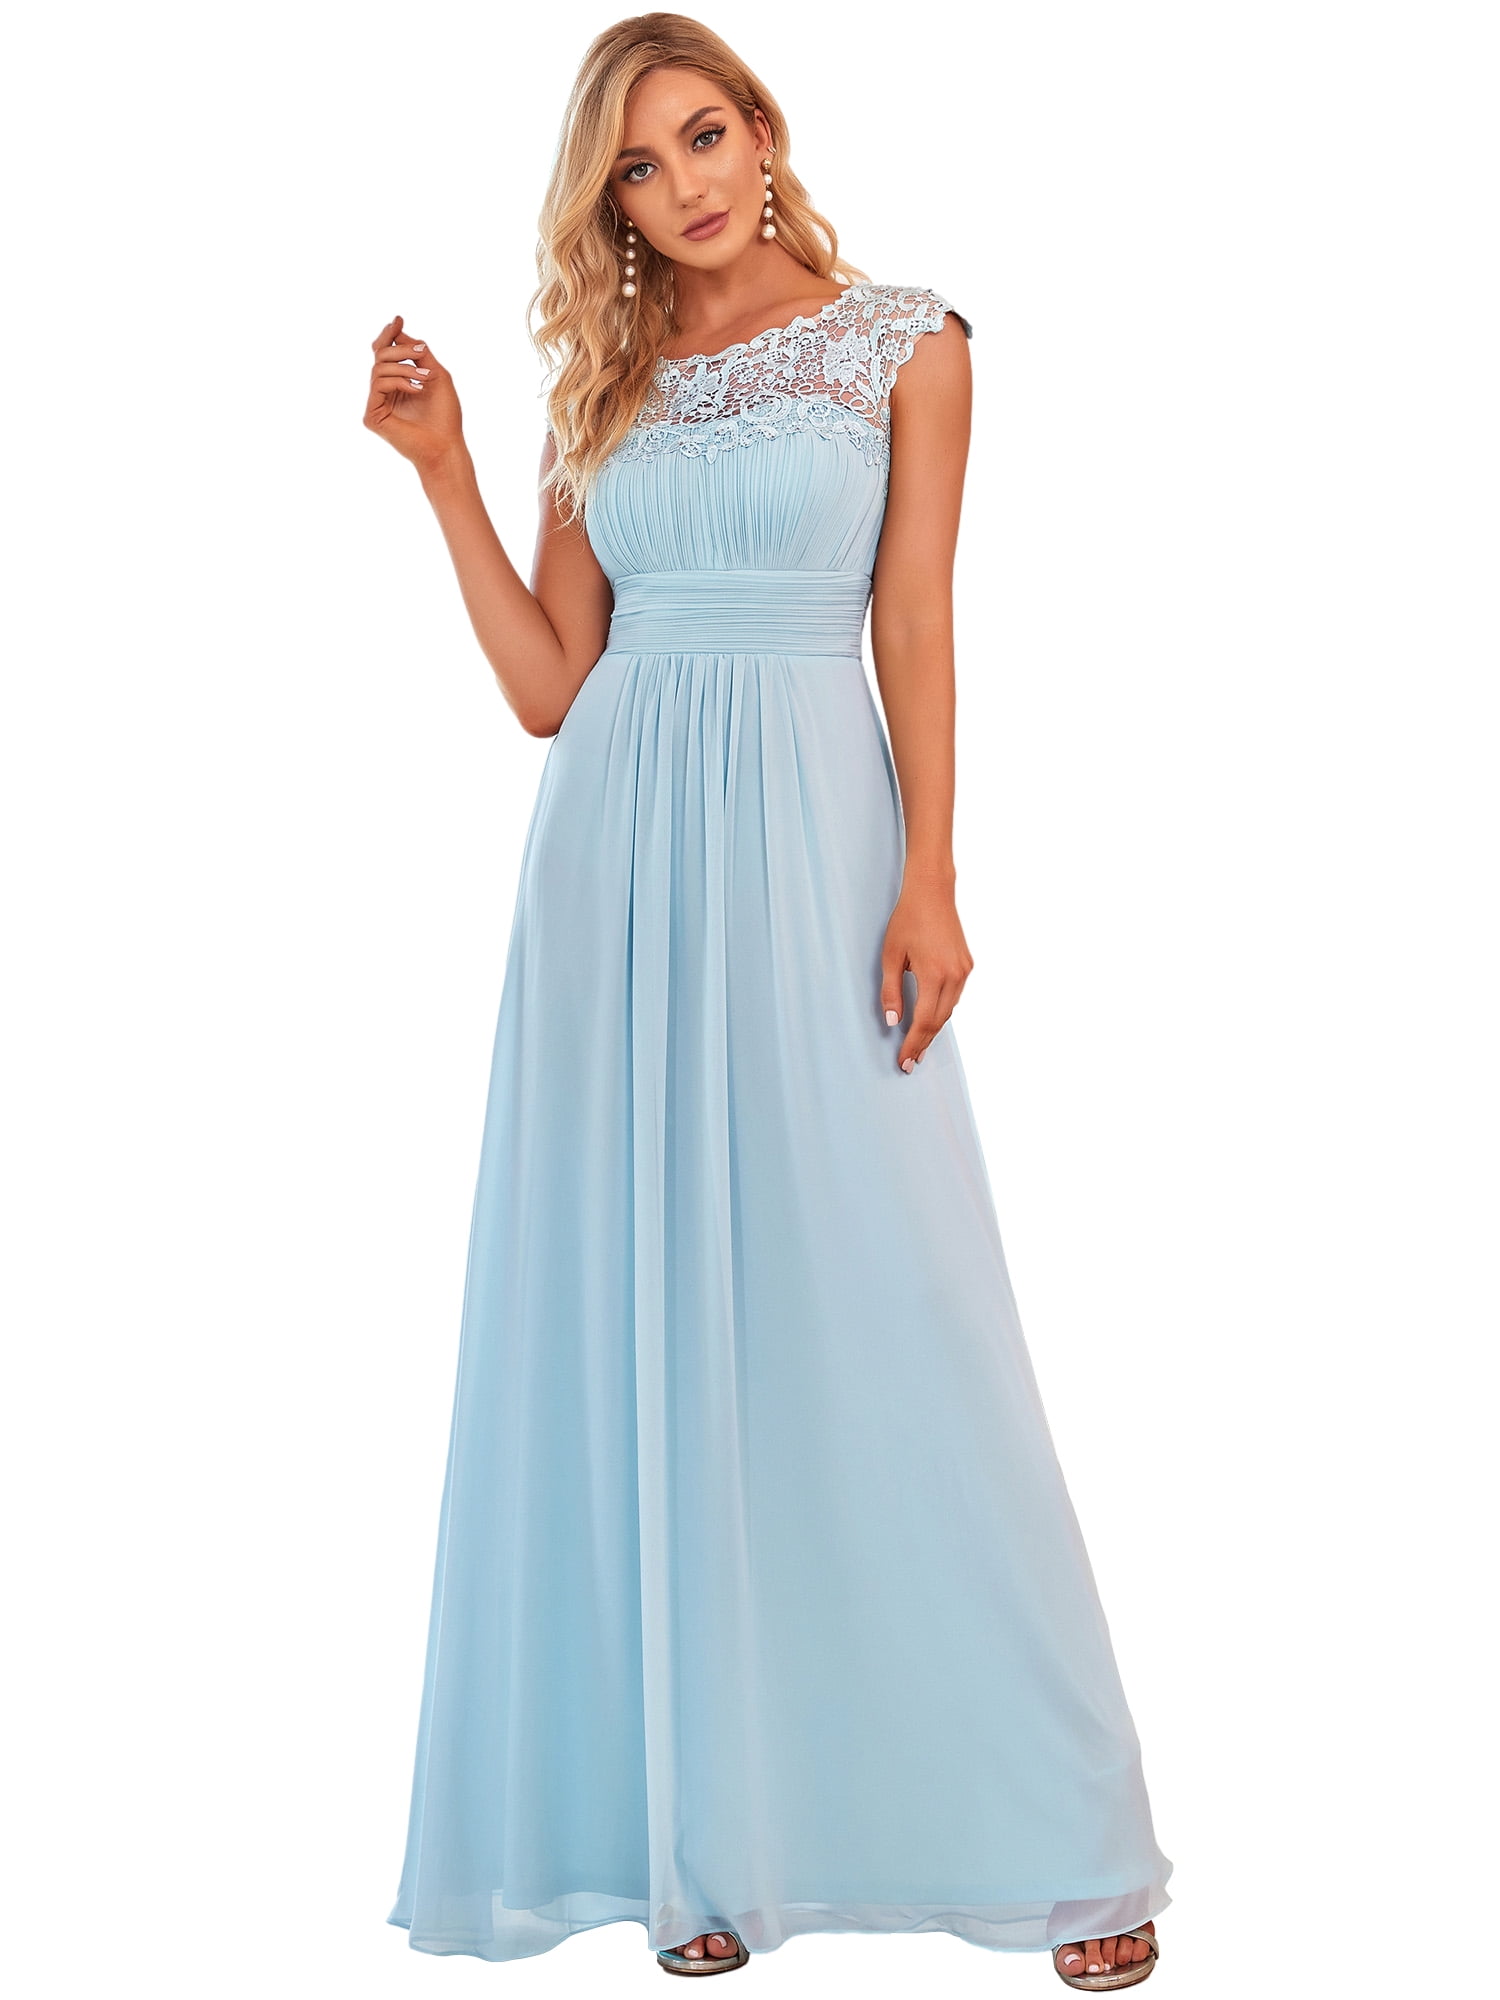 Ever-Pretty Long Lace Cap Sleeve Bridesmaid Dresses Mint Green Party Gowns 09993 